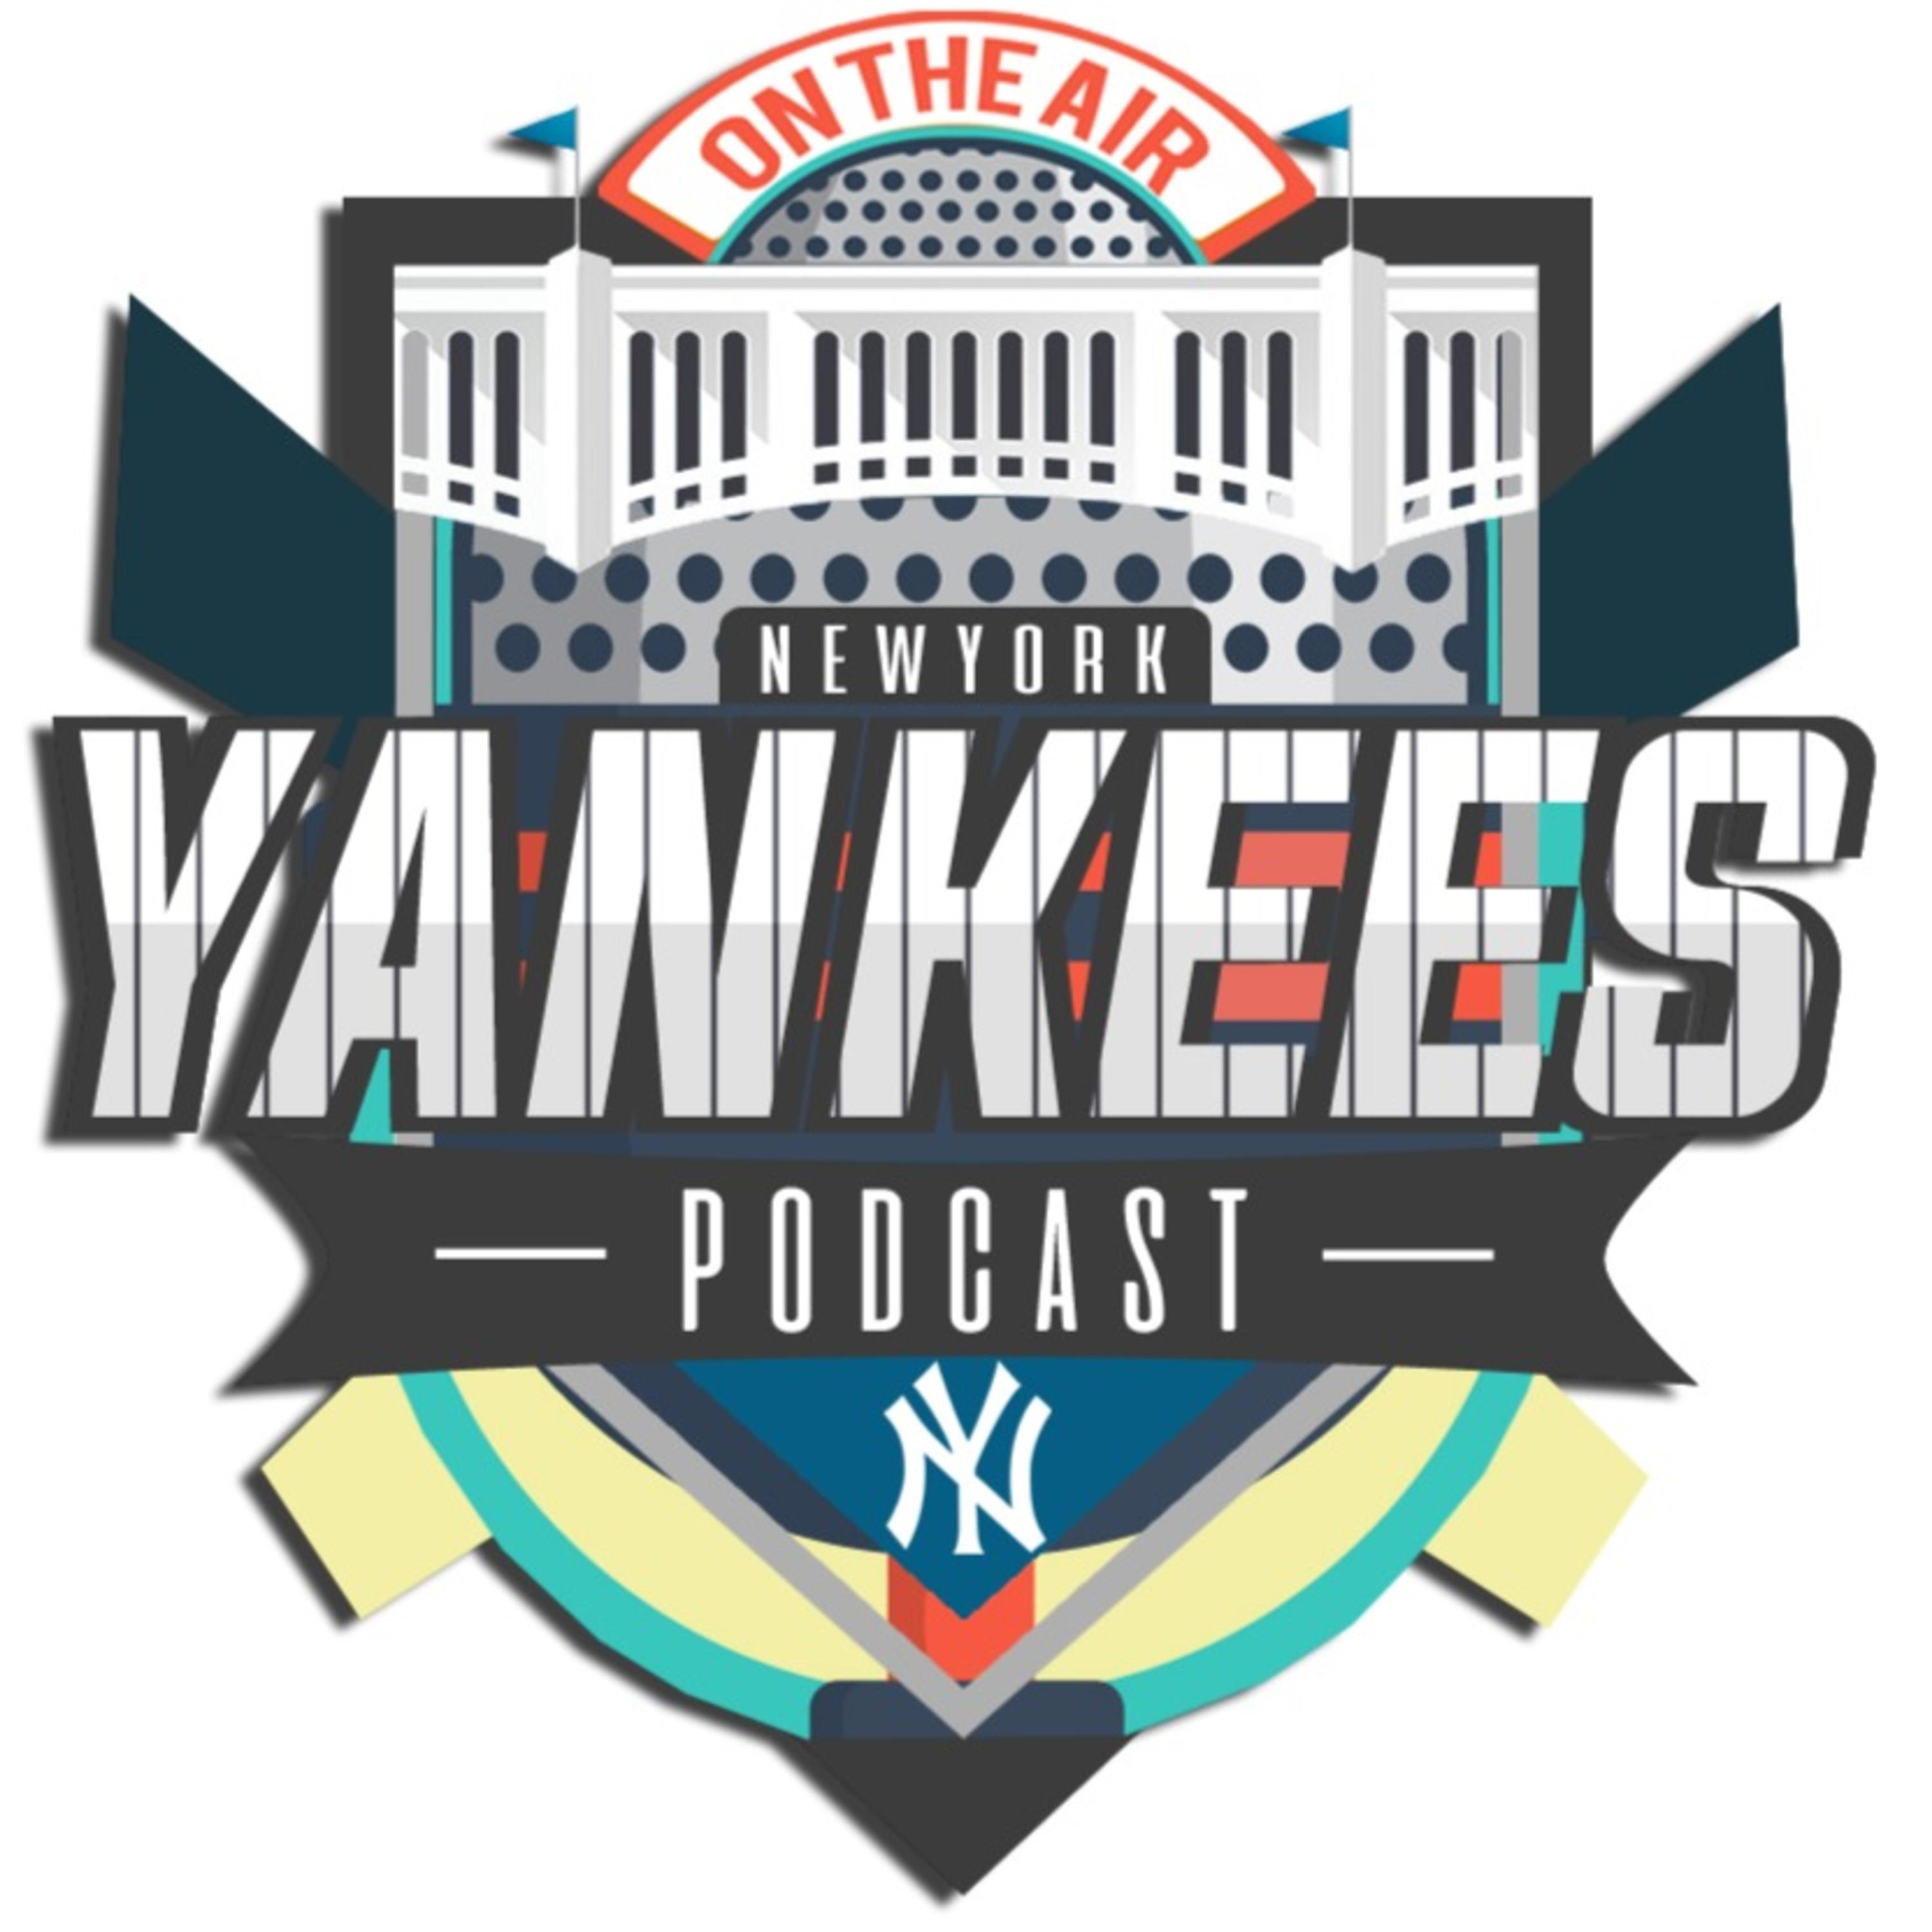 New York Yankees Hungary Podcast - Bé x DS! x Mike - Episode 4